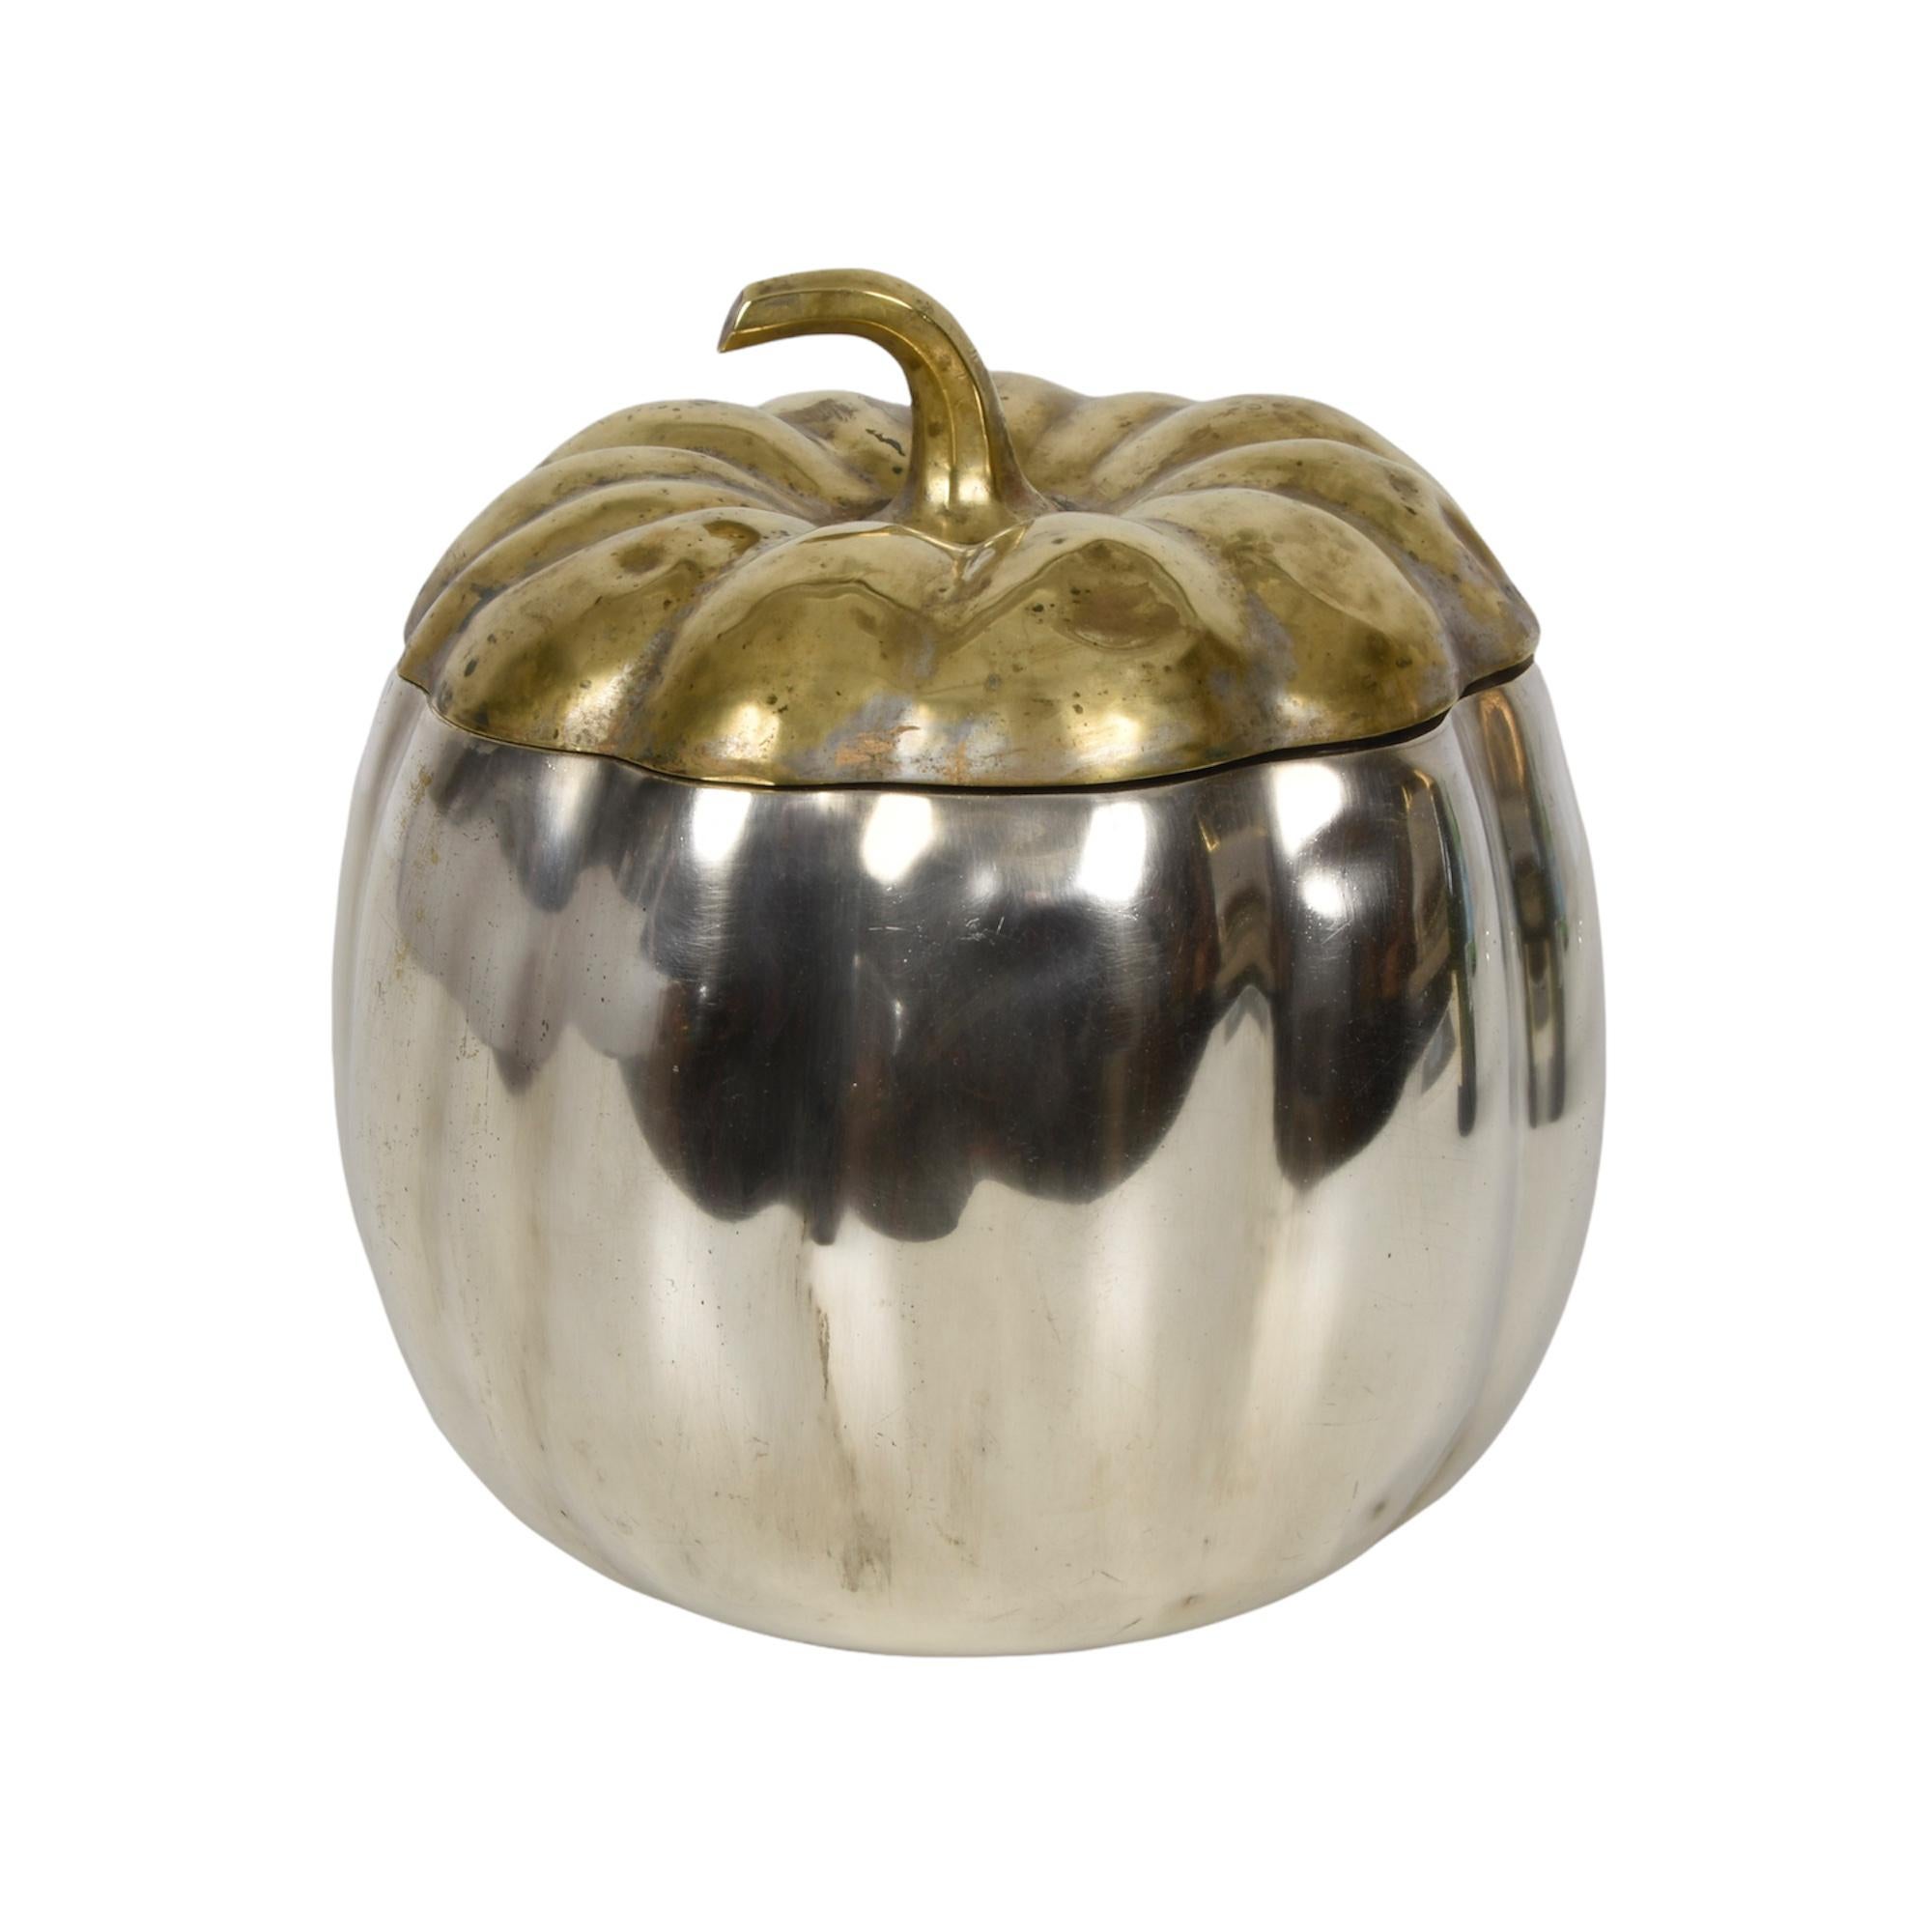 20th Century Teghini Firenze Midcentury Italian Silver and Brass Ice Bucket with Pumpkin Top